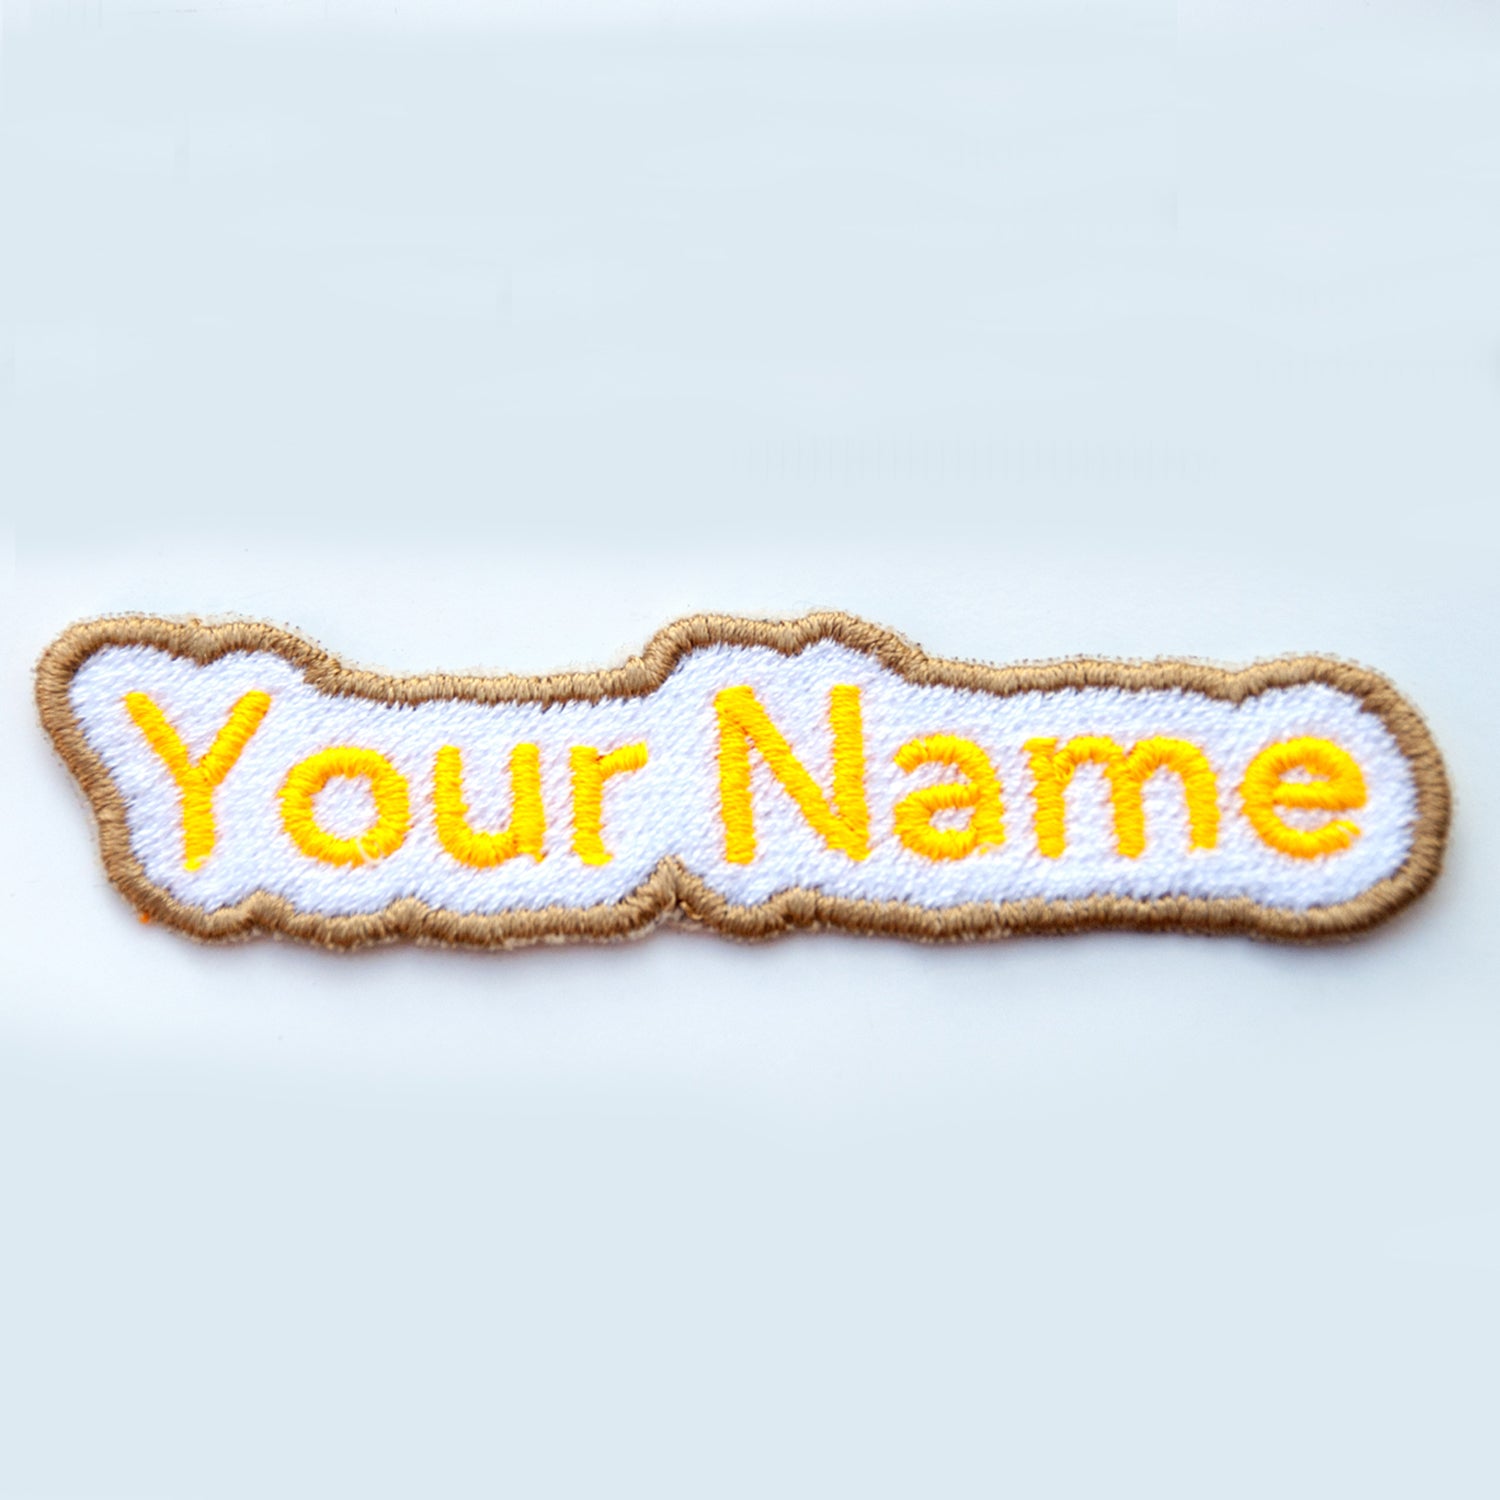 Personalised Embroidered patch, custom patch, embroidery - Sugar Gecko